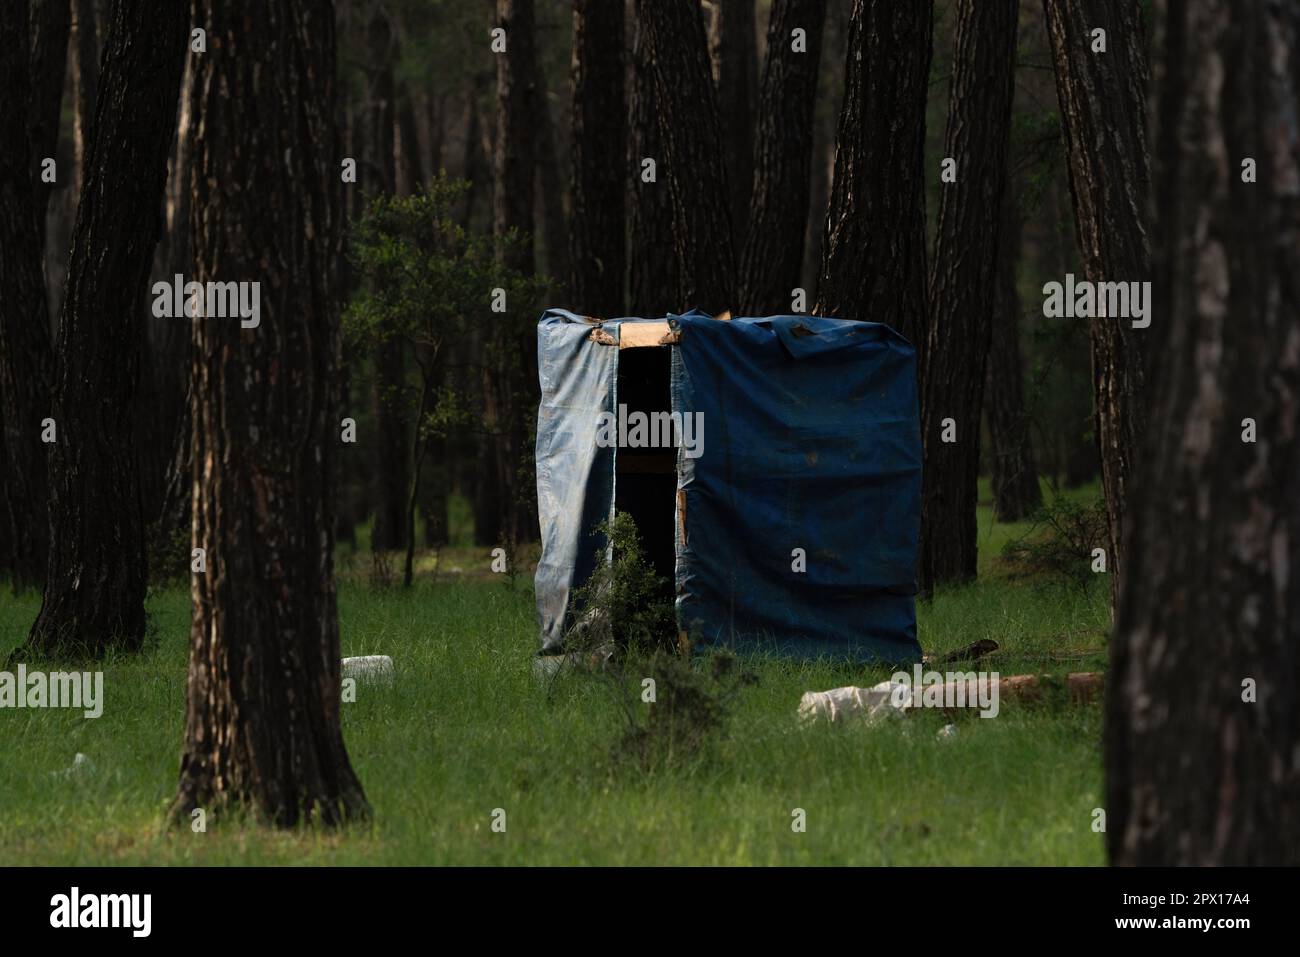 Prefabricated toilet for use in the forest Stock Photo